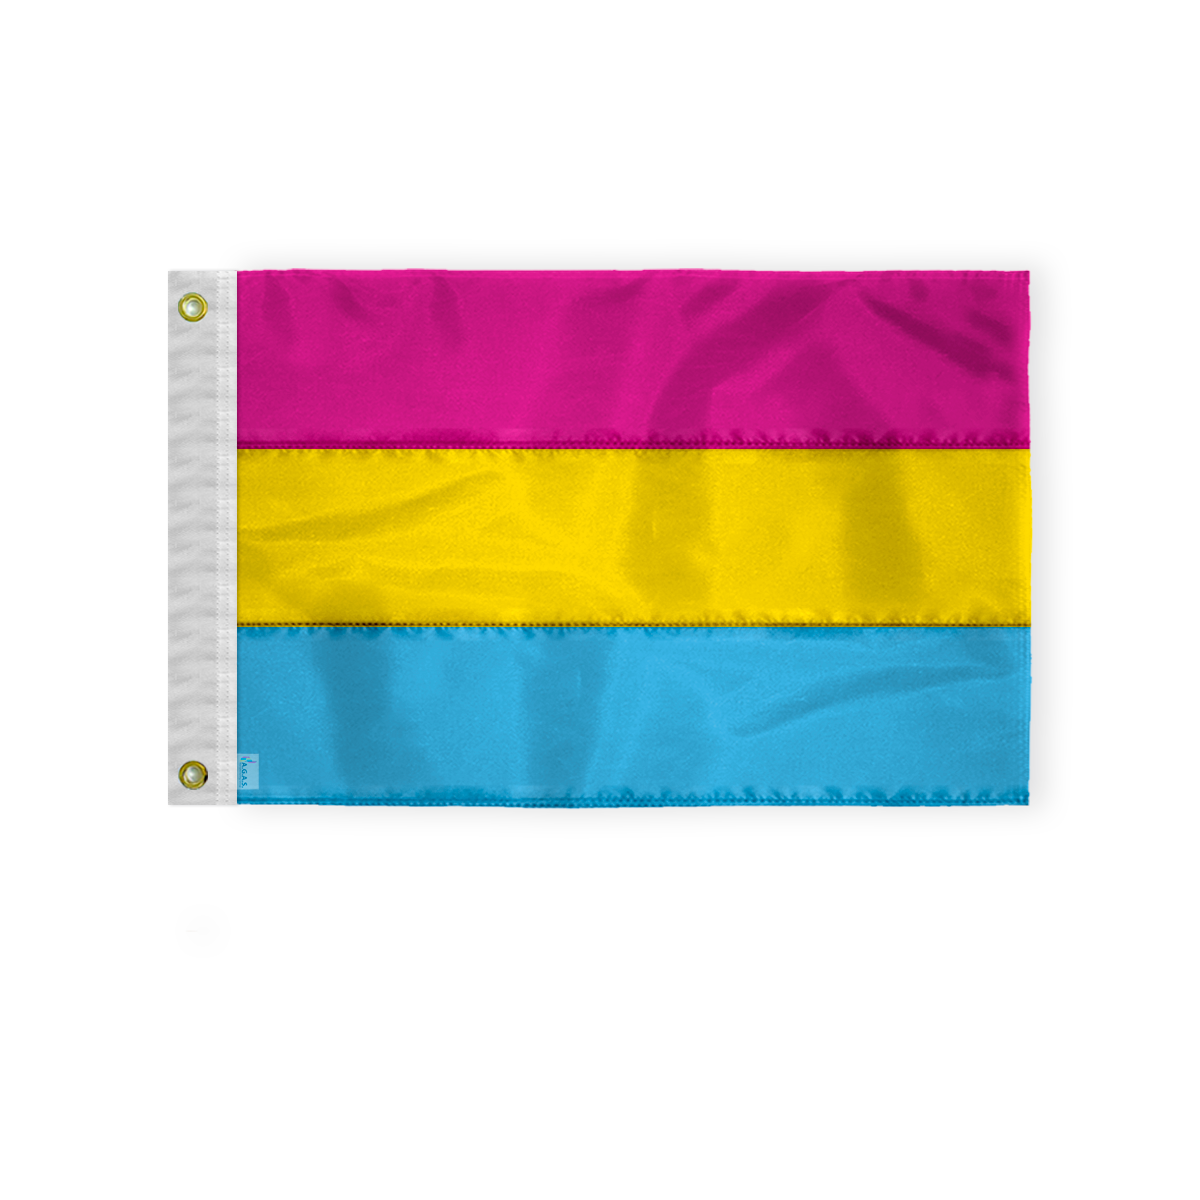 AGAS Pansexual Pan Pride Boat Nautical Flag 12x18 Inch